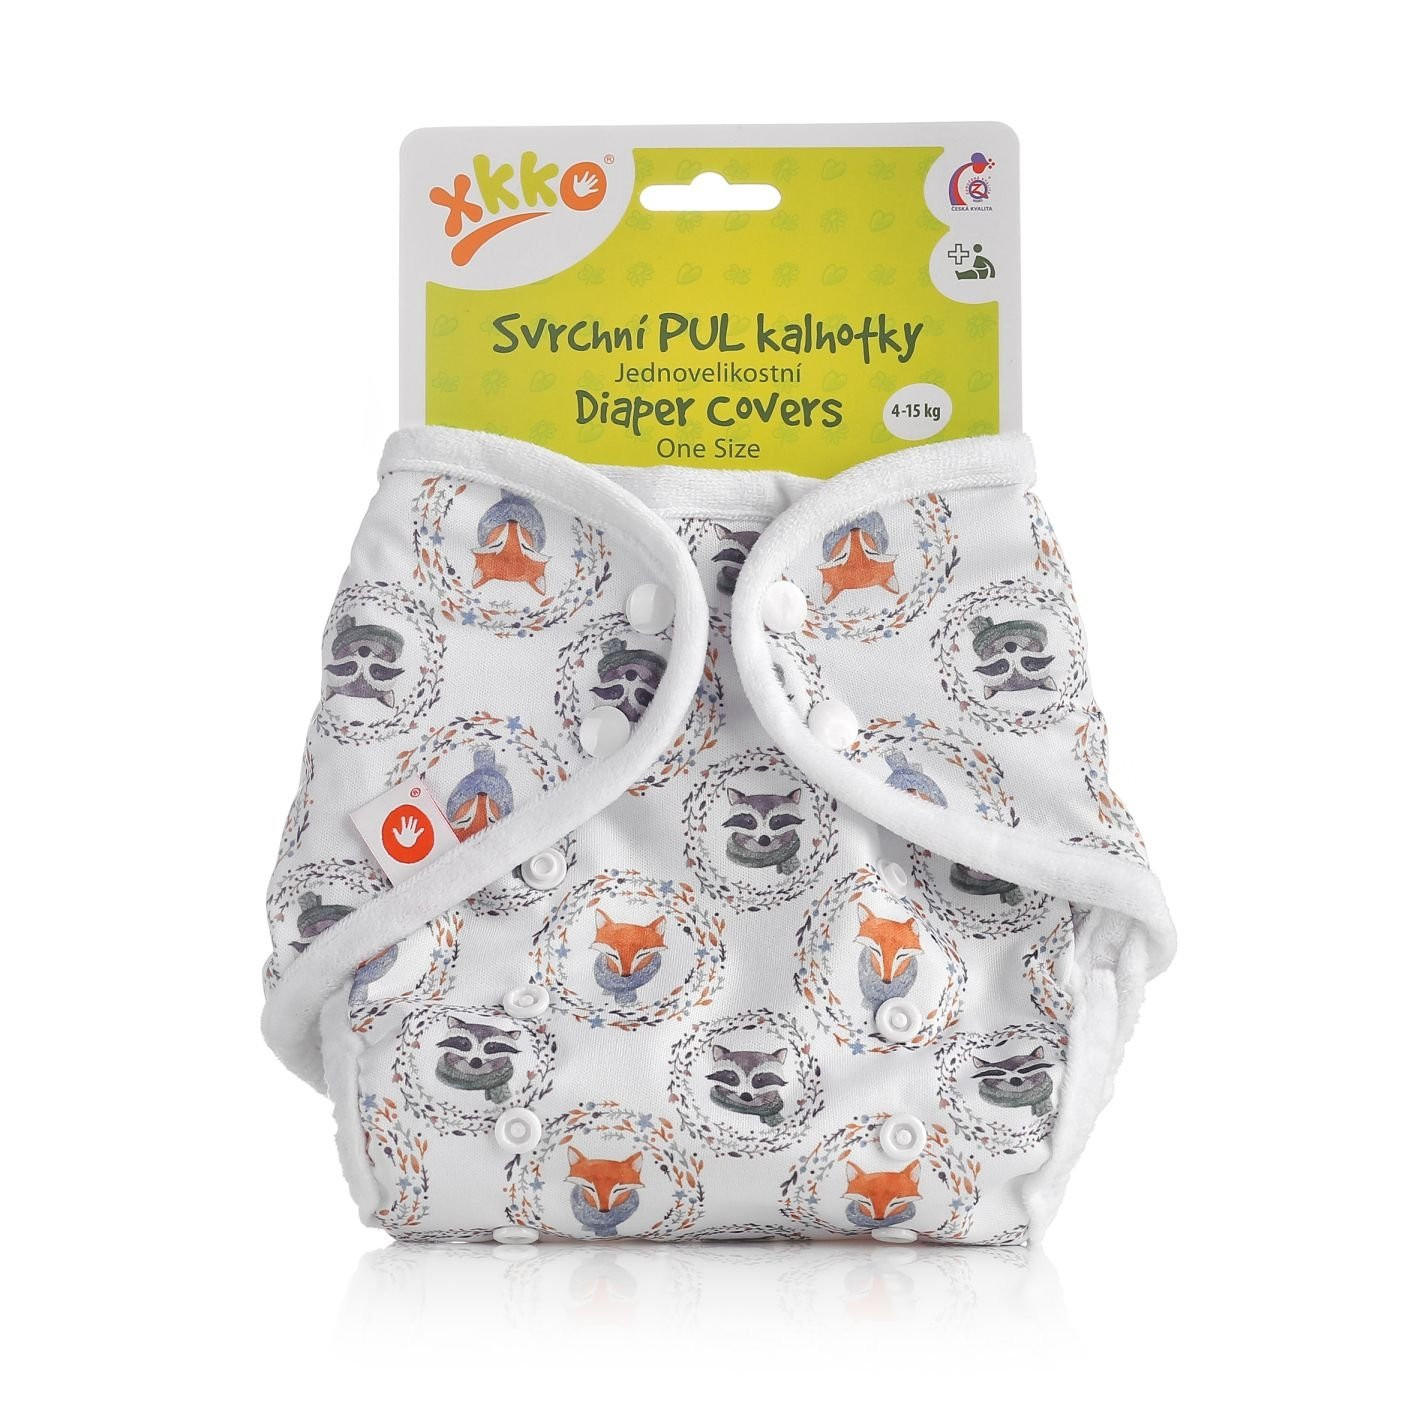 We recommend our XKKO Diaper Cover One Size - Fox&Raccoon - the